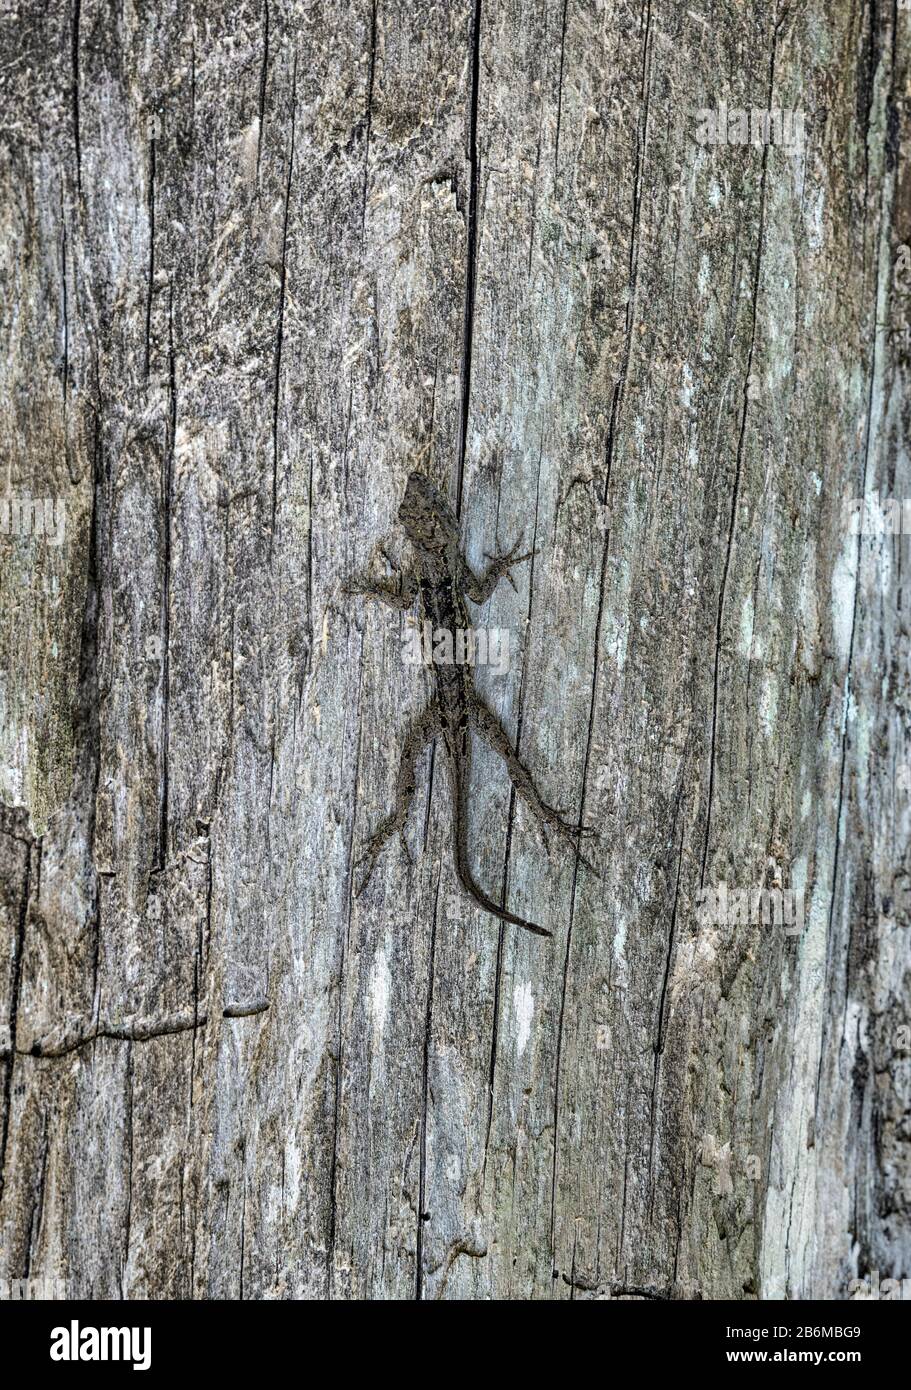 Brown Anole lizard blends with the trunk of a tree. Stock Photo